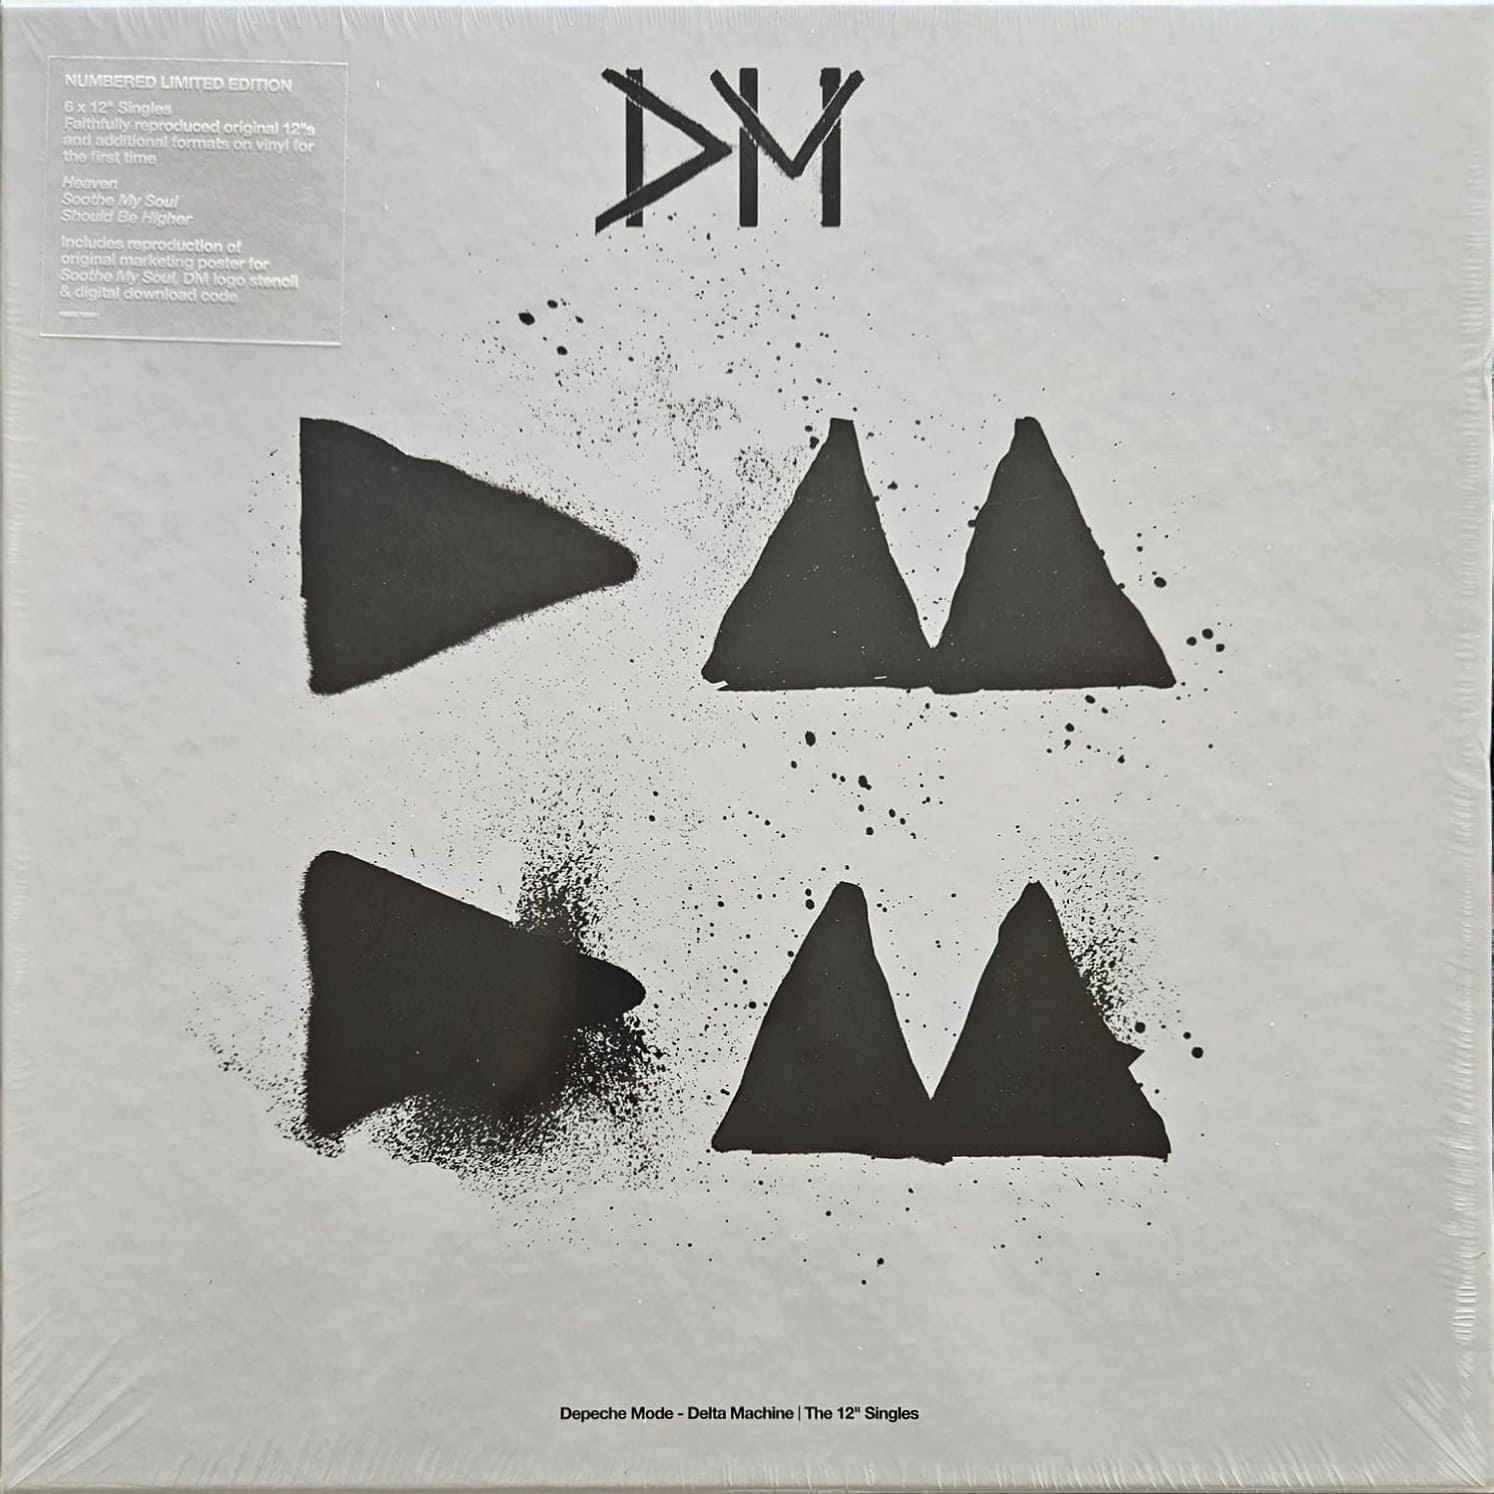 Depeche Mode Music For the Masses: The 12 Singles Numbered, Limited  Edition 7 Disc Box Set